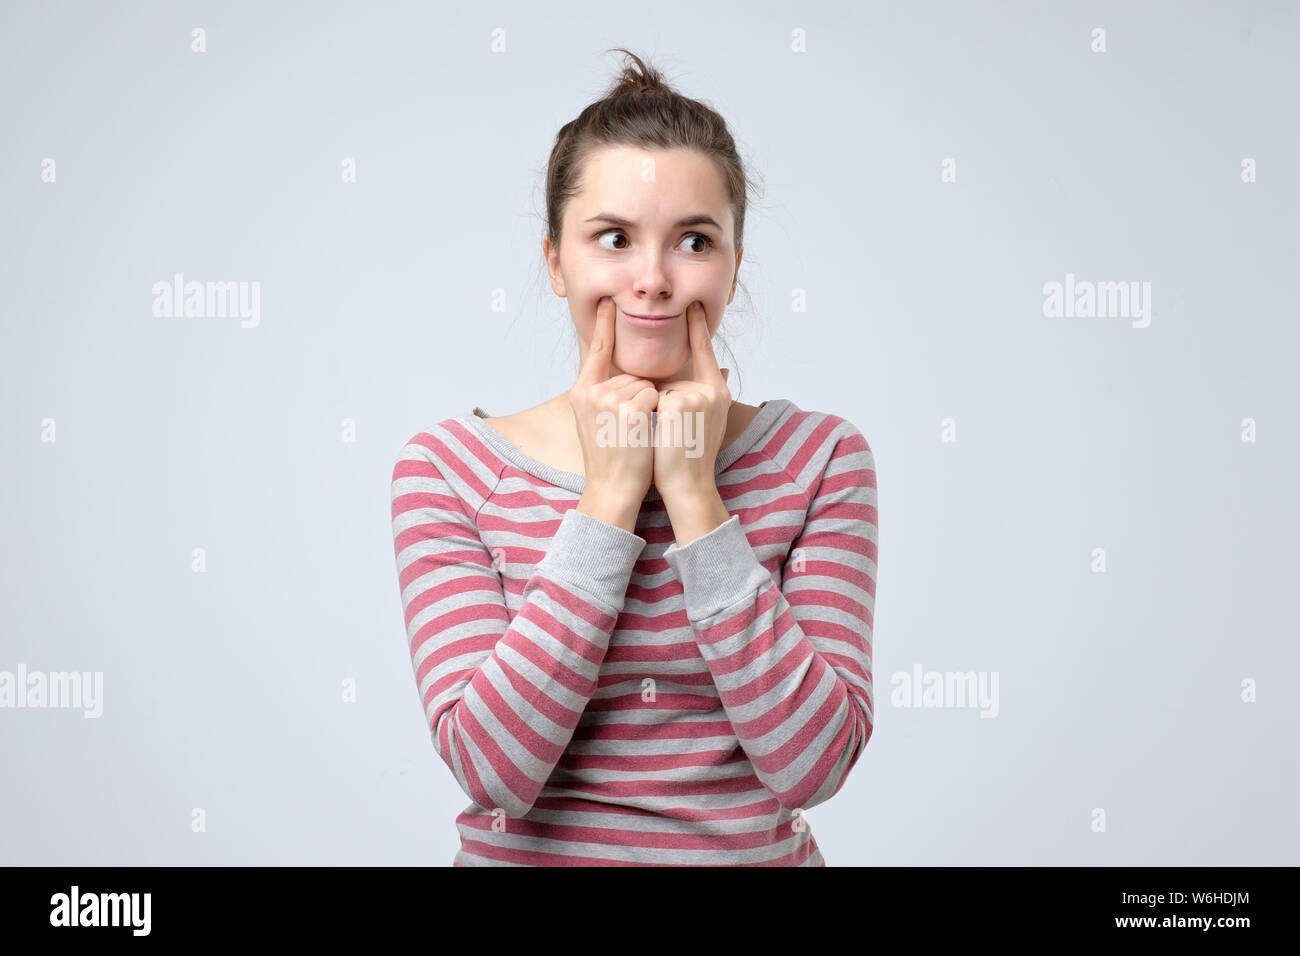 Woman making fake smile with her fingers stretching the corners of her mouth Stock Photo